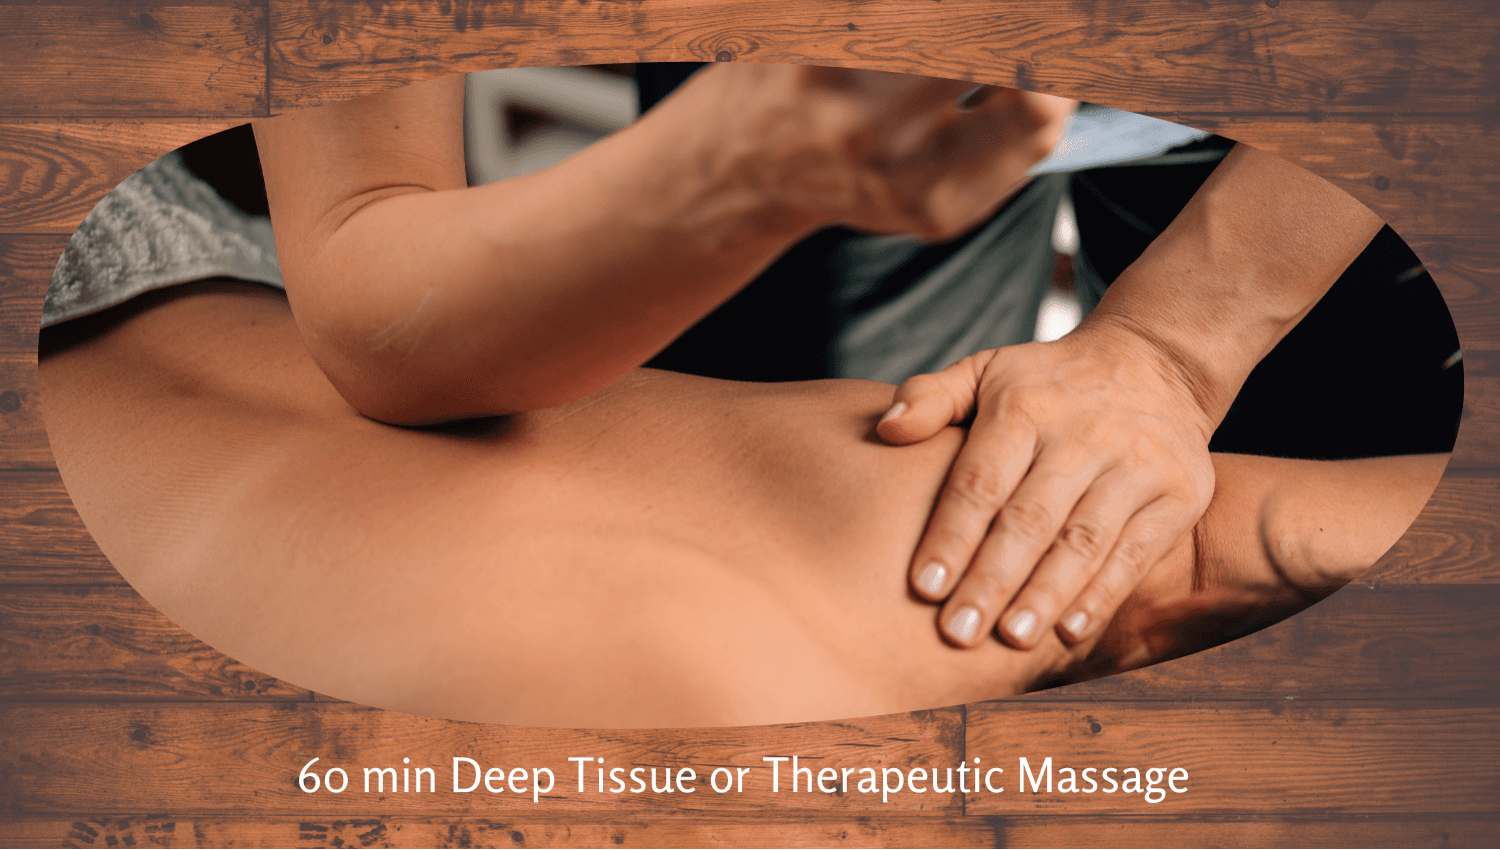 Image for 60 min Therapeutic or Deep Tissue Massage Therapy